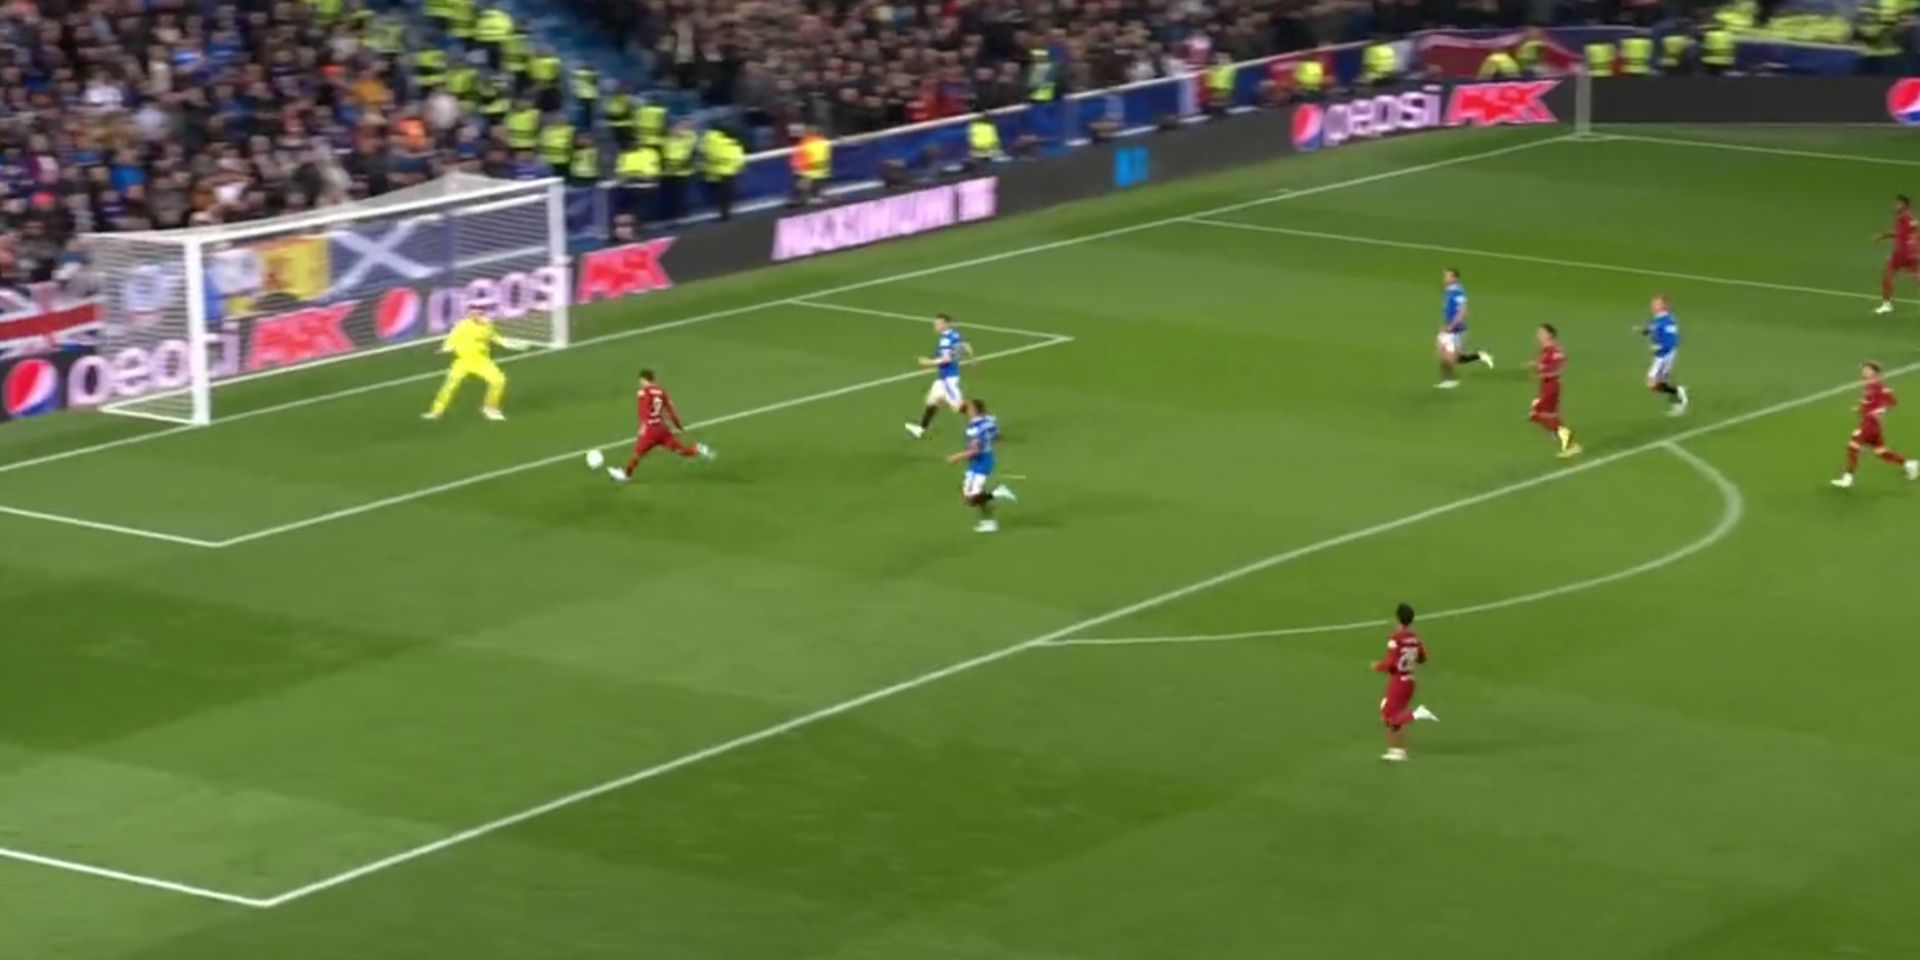 (Video) Bobby Firmino secures his brace and eighth goal of the season to put Liverpool ahead against Rangers